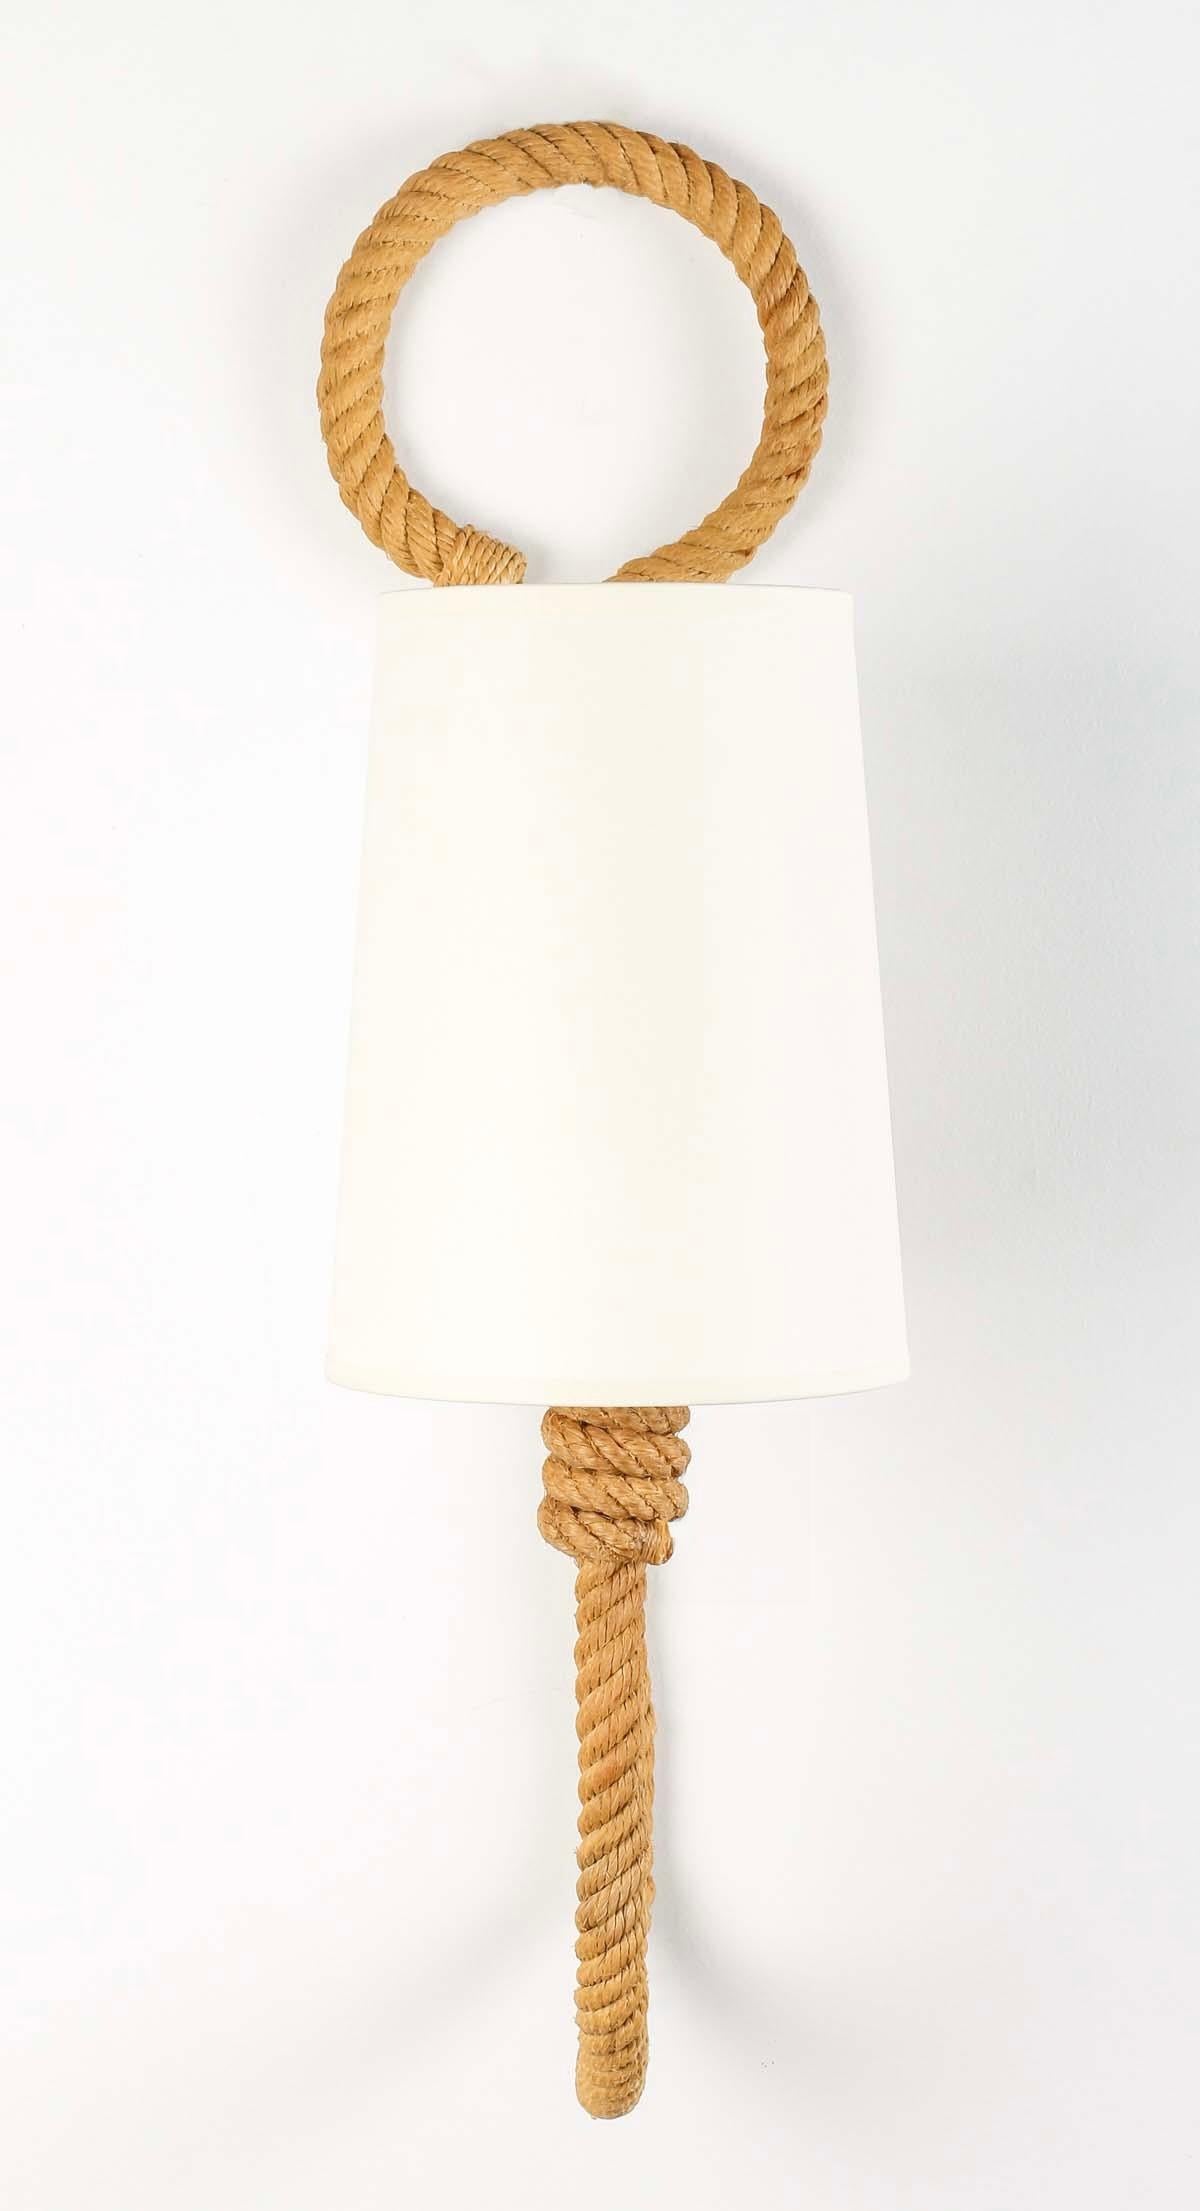 Composed of a central rope stem embellished with a loop on the upper part, on the lower part the stem rises to the front to form the light arm clad with an off-white cotton trapeze-shaped shade.
1 bulb per sconce.

Adrien Audoux and Frida Minet are